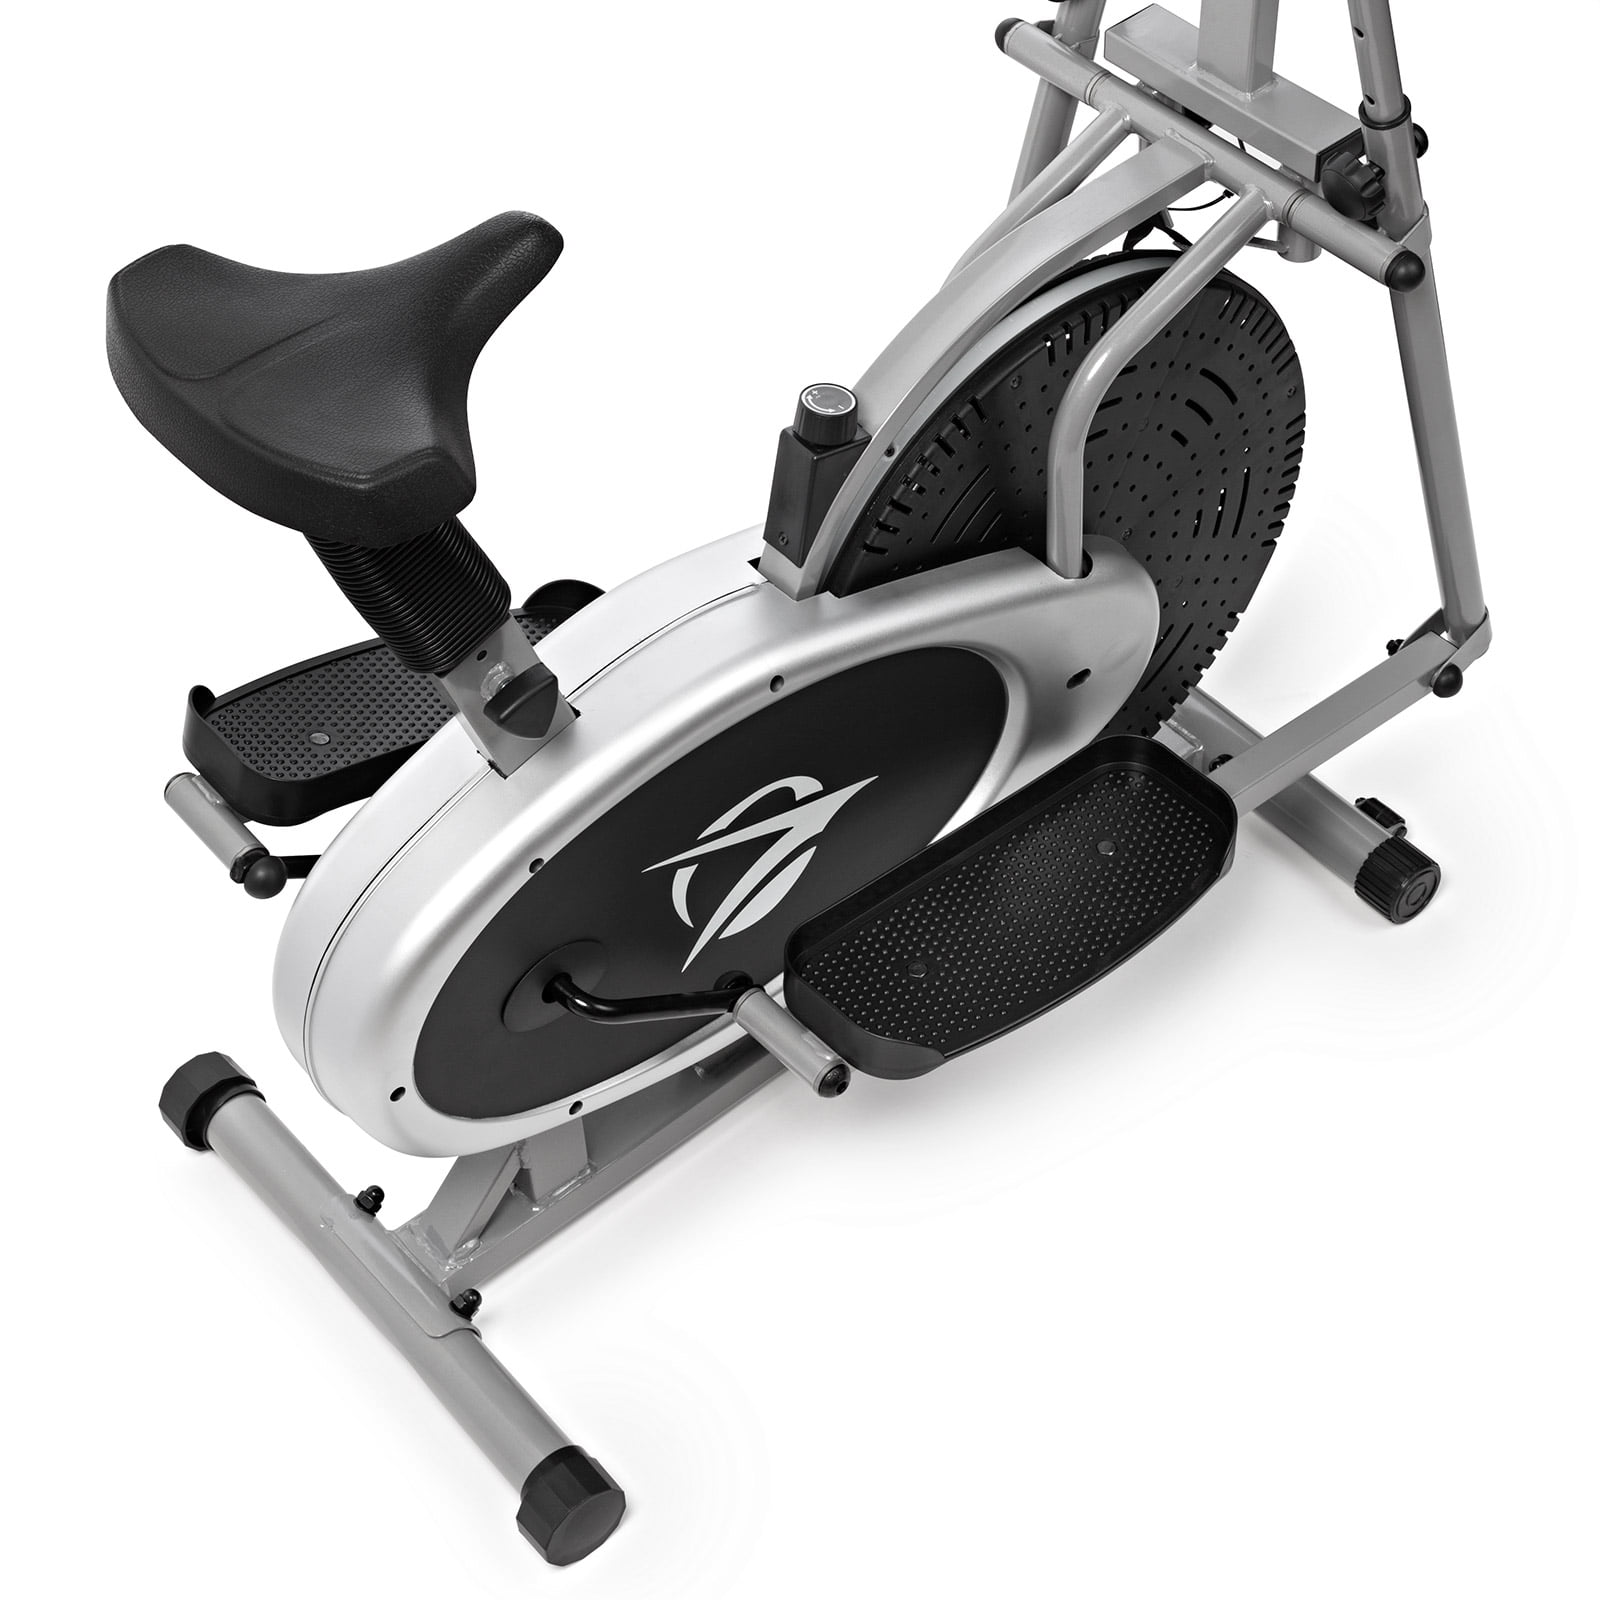 Details about   2020 Model Magnetic Elliptical Machine Home Exercise Fitness Cardio Sport 